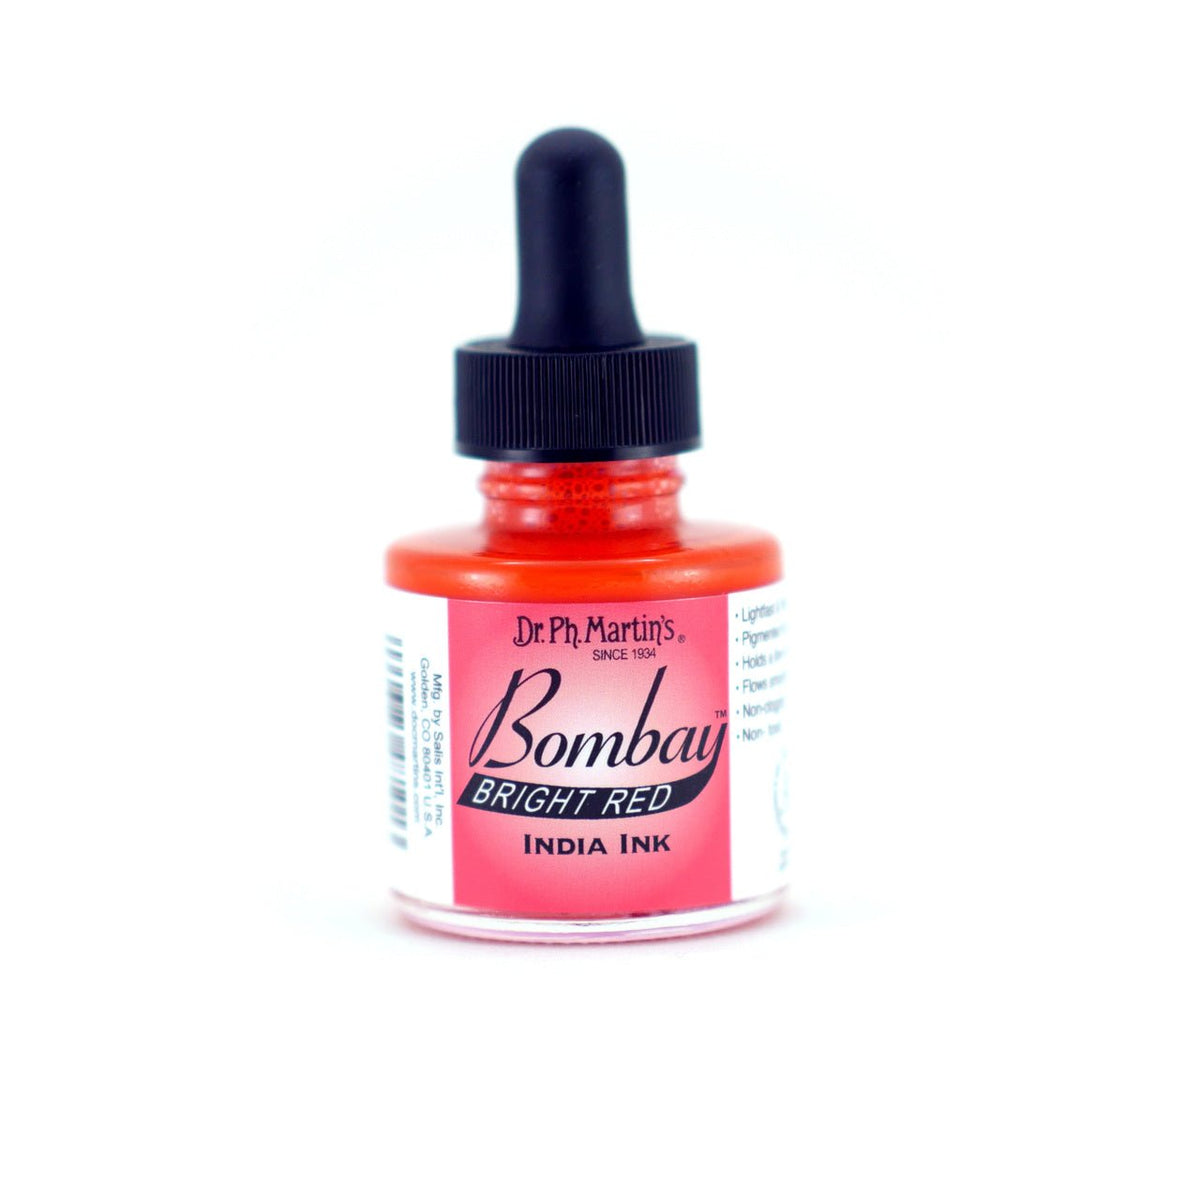 Dr. P.H. Martin Bombay India Ink 1oz - Bright Red - merriartist.com